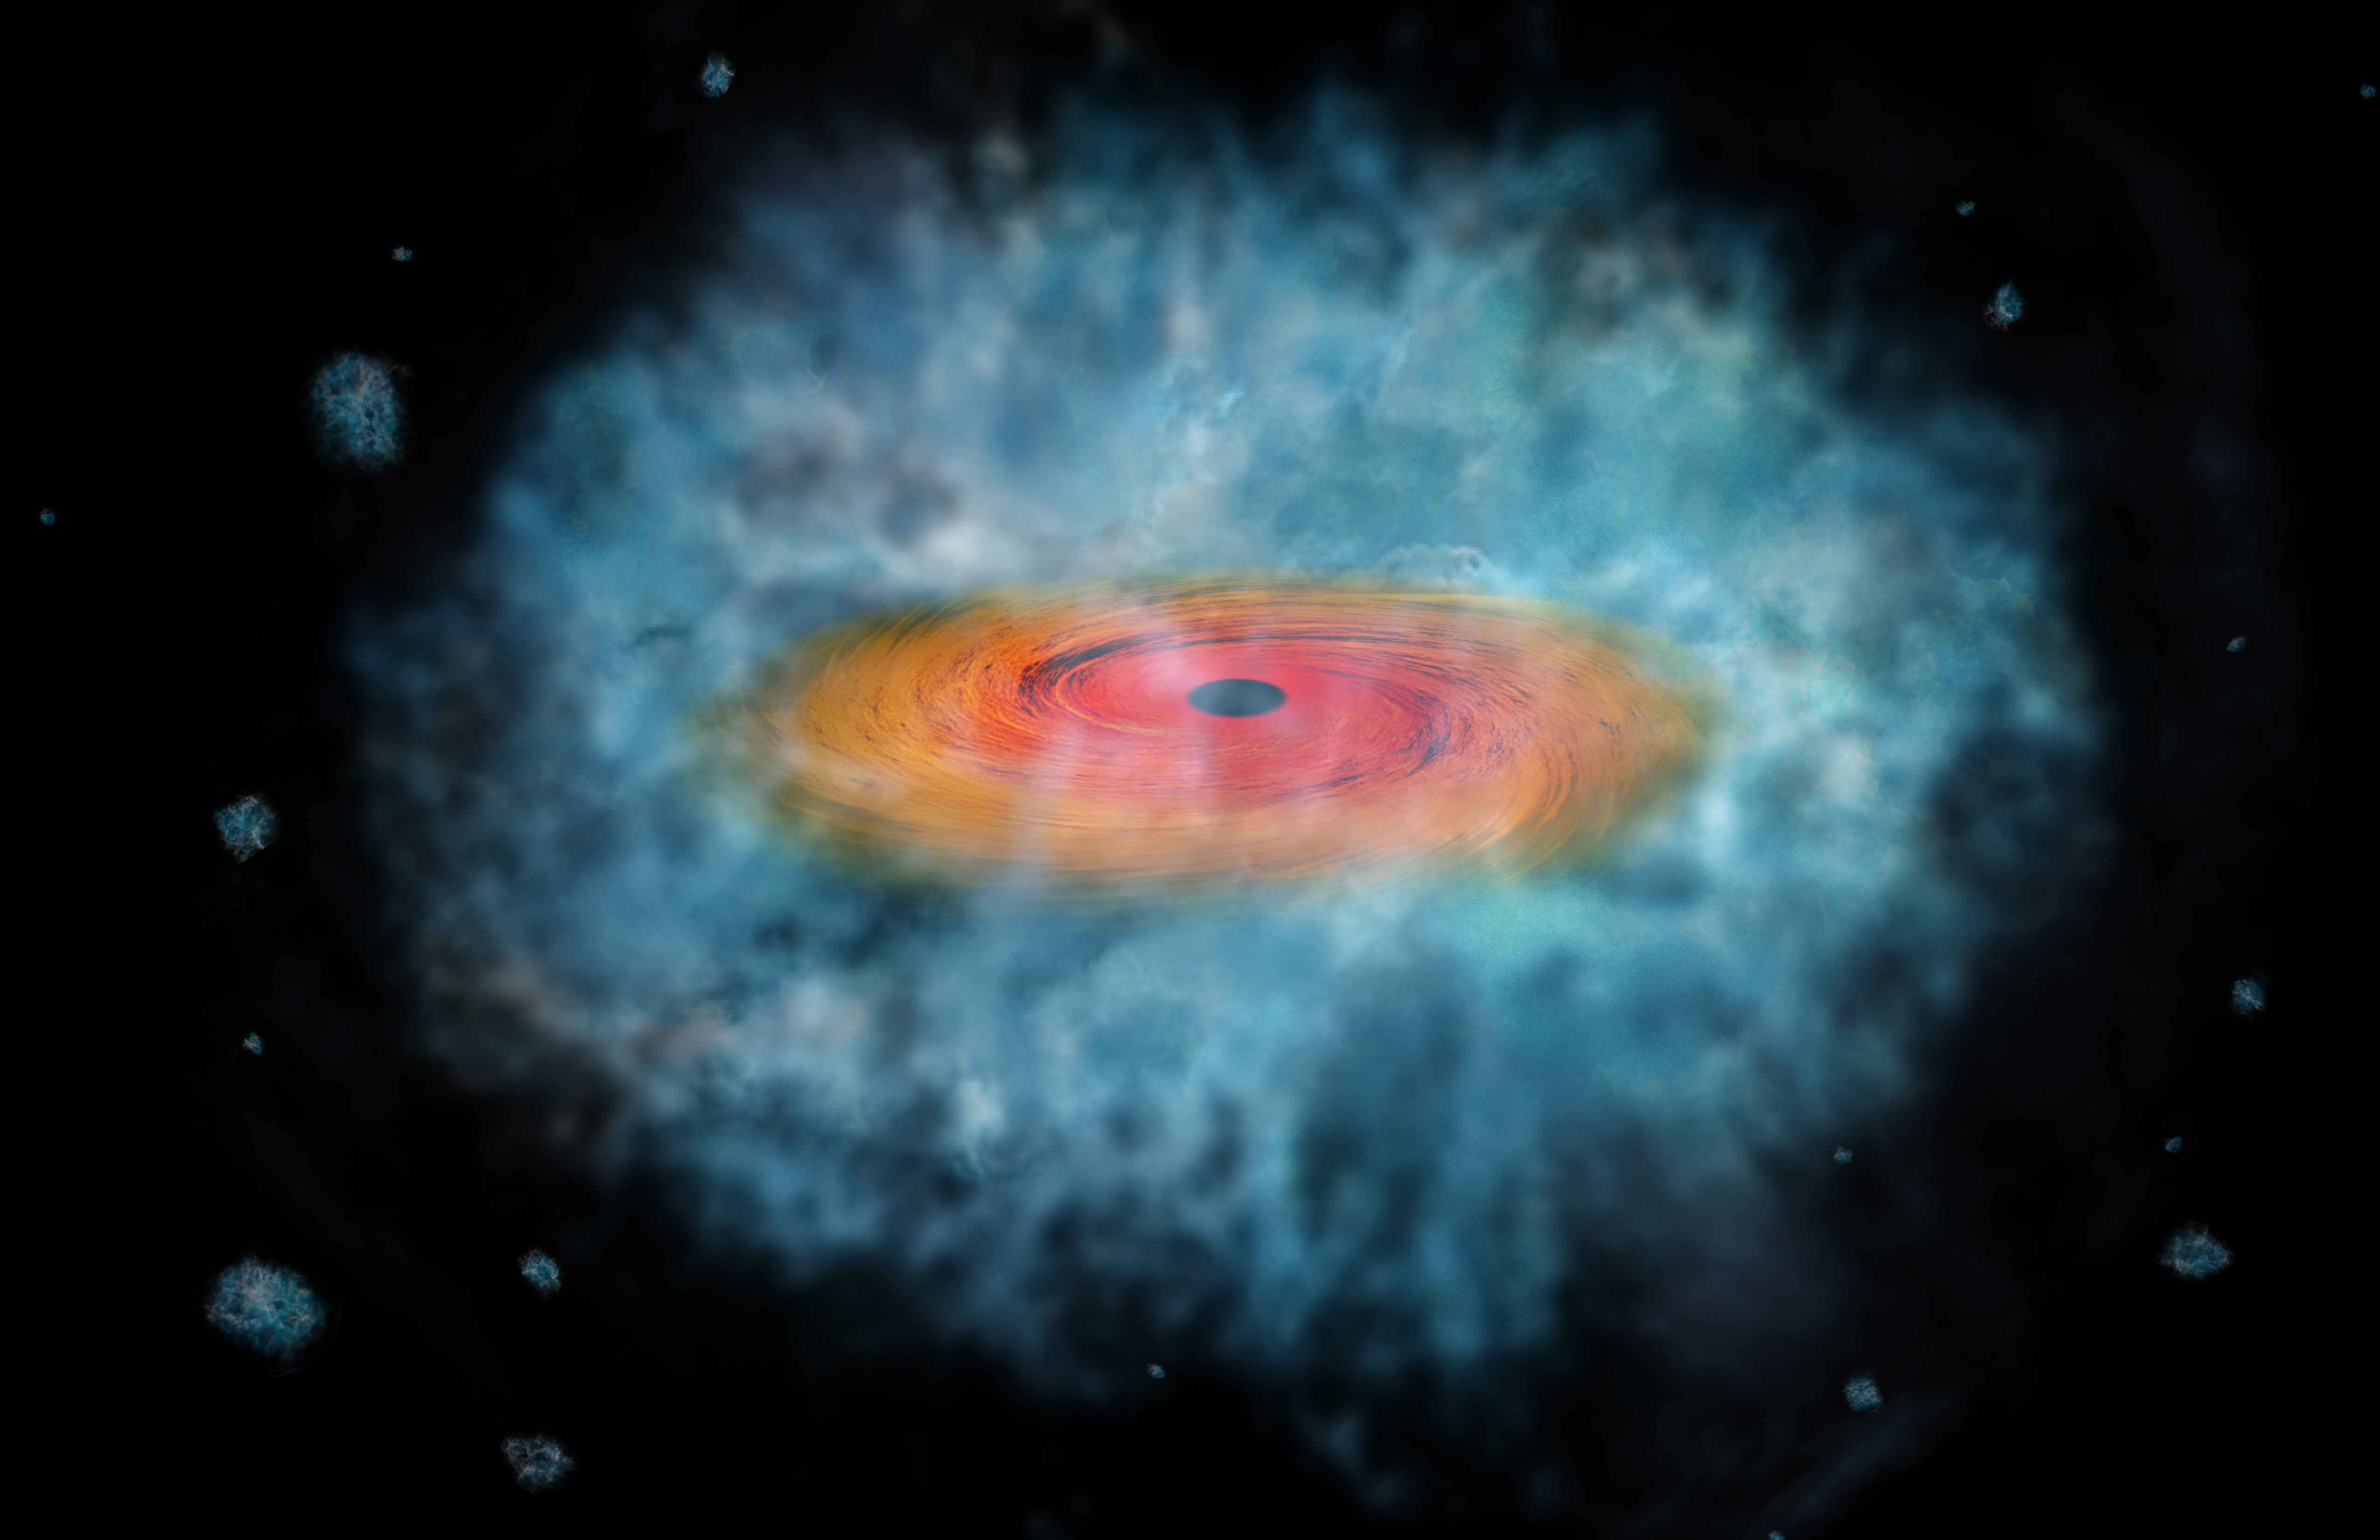 An handout picture released on May 25, 2016 by the European Space Agency (ESA) shows an artist impression of a possible seed for the formation of a supermassive black hole.  Two of these possible seeds were discovered by an Italian team, using three space telescopes: the NASA Chandra X-ray Observatory, the NASA/ESA Hubble Space Telescope, and the NASA Spitzer Space Telescope. / AFP PHOTO / ESA / - / RESTRICTED TO EDITORIAL USE - MANDATORY CREDIT "AFP PHOTO /ESA/HUBBLE" - NO MARKETING NO ADVERTISING CAMPAIGNS - DISTRIBUTED AS A SERVICE TO CLIENTS